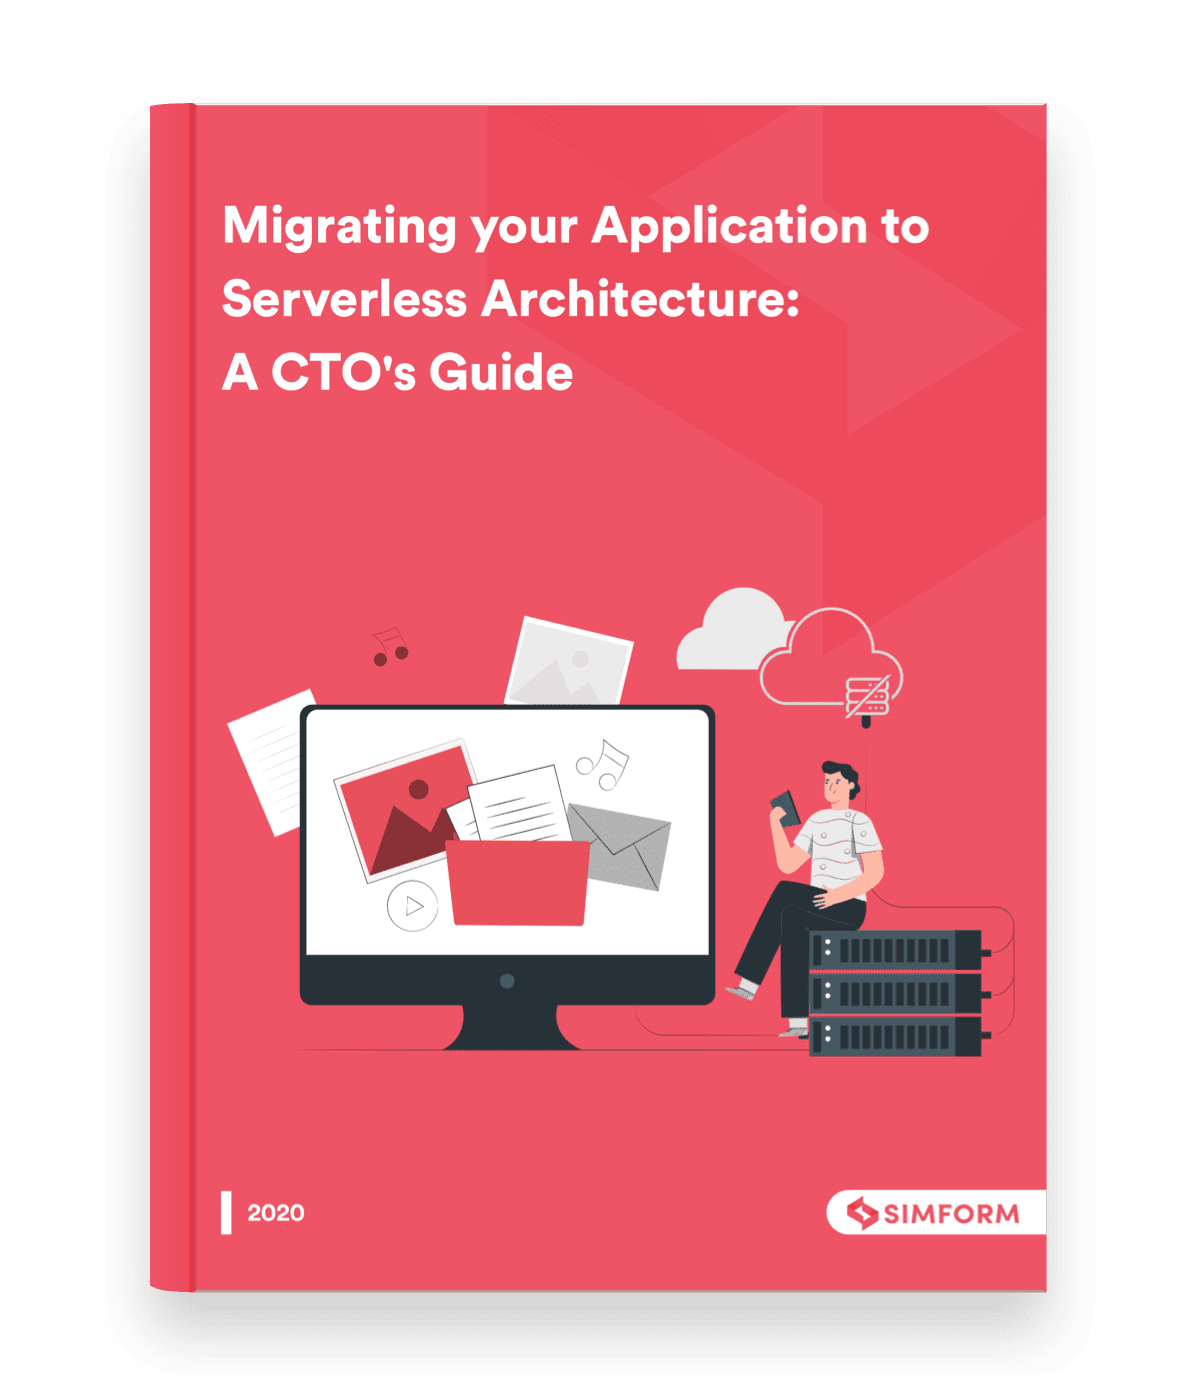 Migrating your App to Serverless Architecture